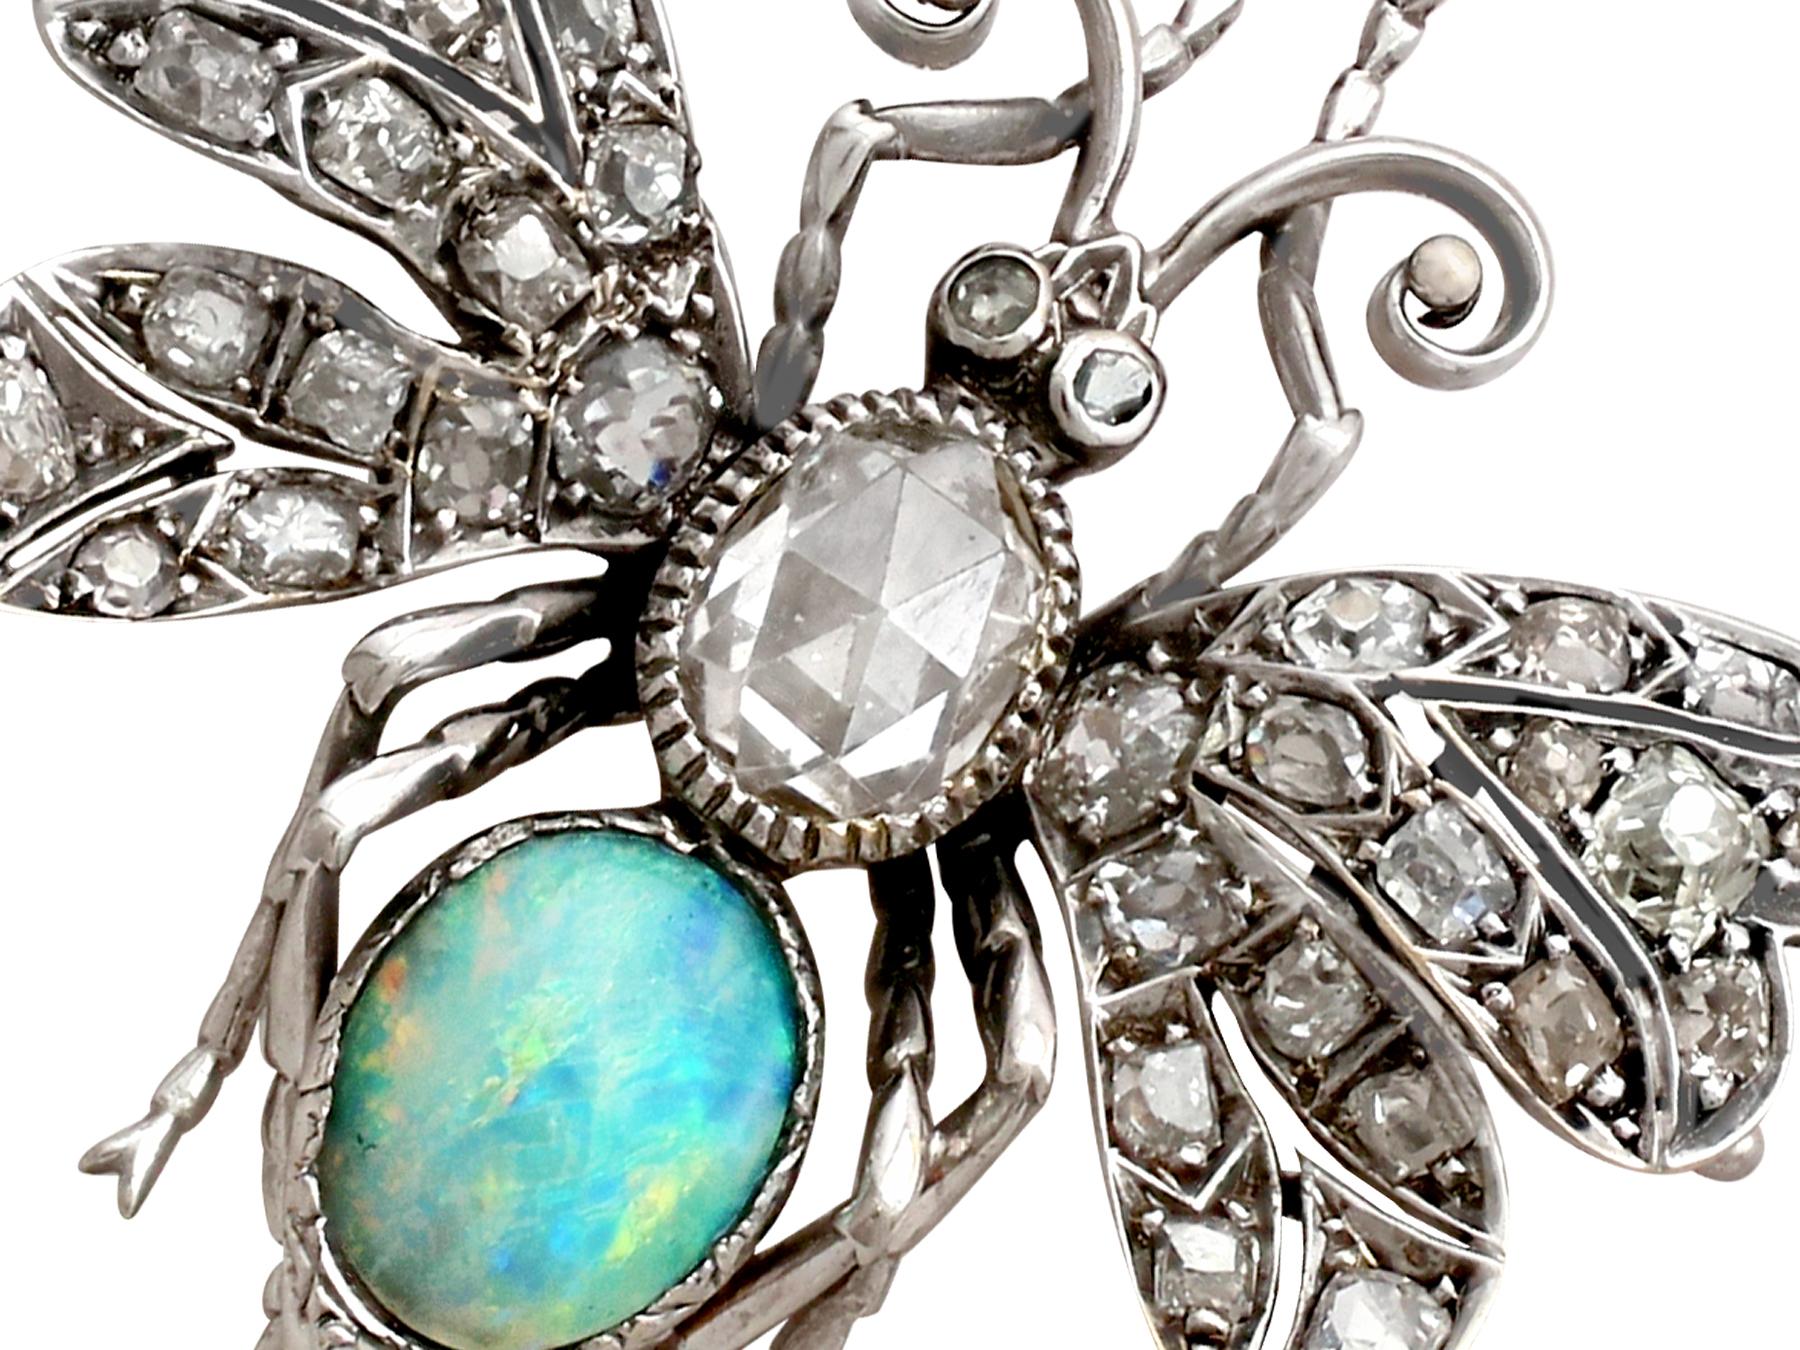 A stunning, fine and impressive antique 2.53 carat diamond and 0.84 carat opal, 18 karat white gold brooch in the form of a winged insect; part of our antique jewellery / estate jewelry collections.

This stunning, fine antique insect brooch has